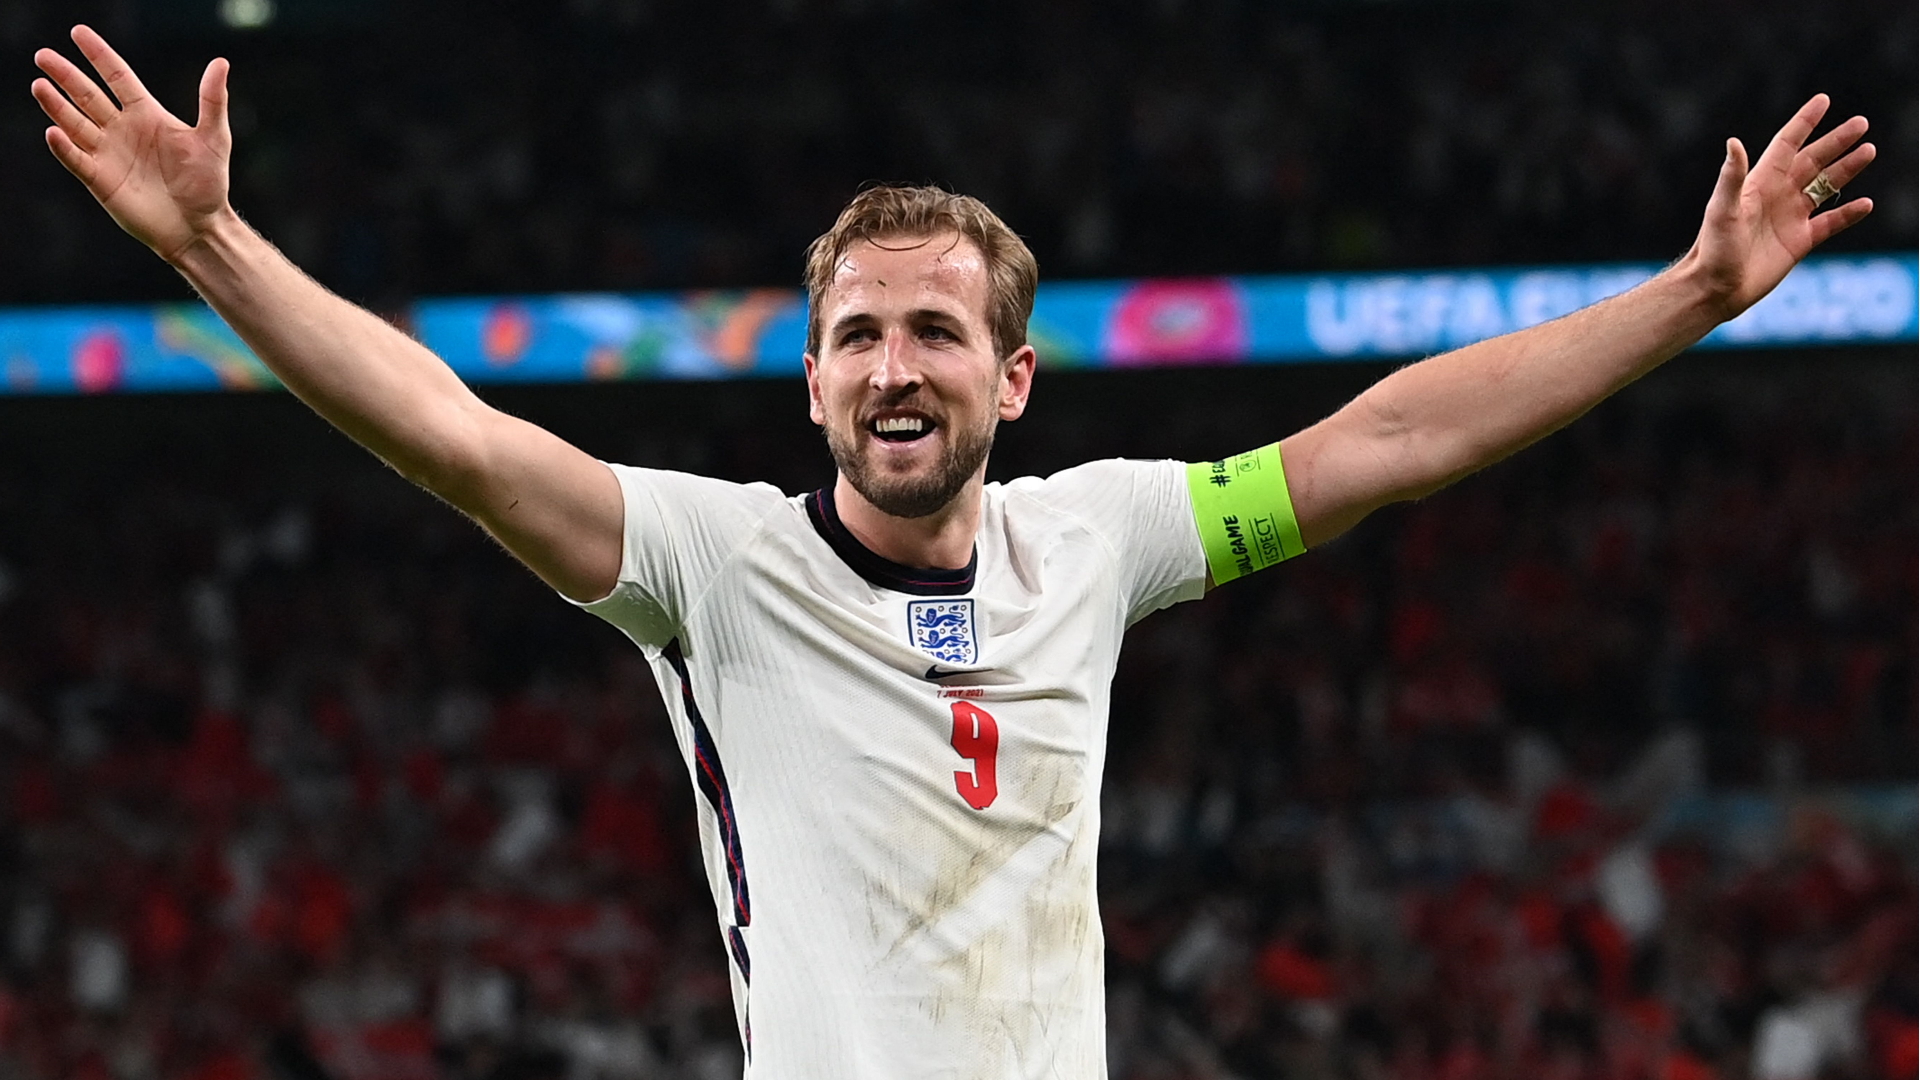 'For once it fell our way' - Kane welcomes penalty 'bonus' in firing England to Euro 2020 final